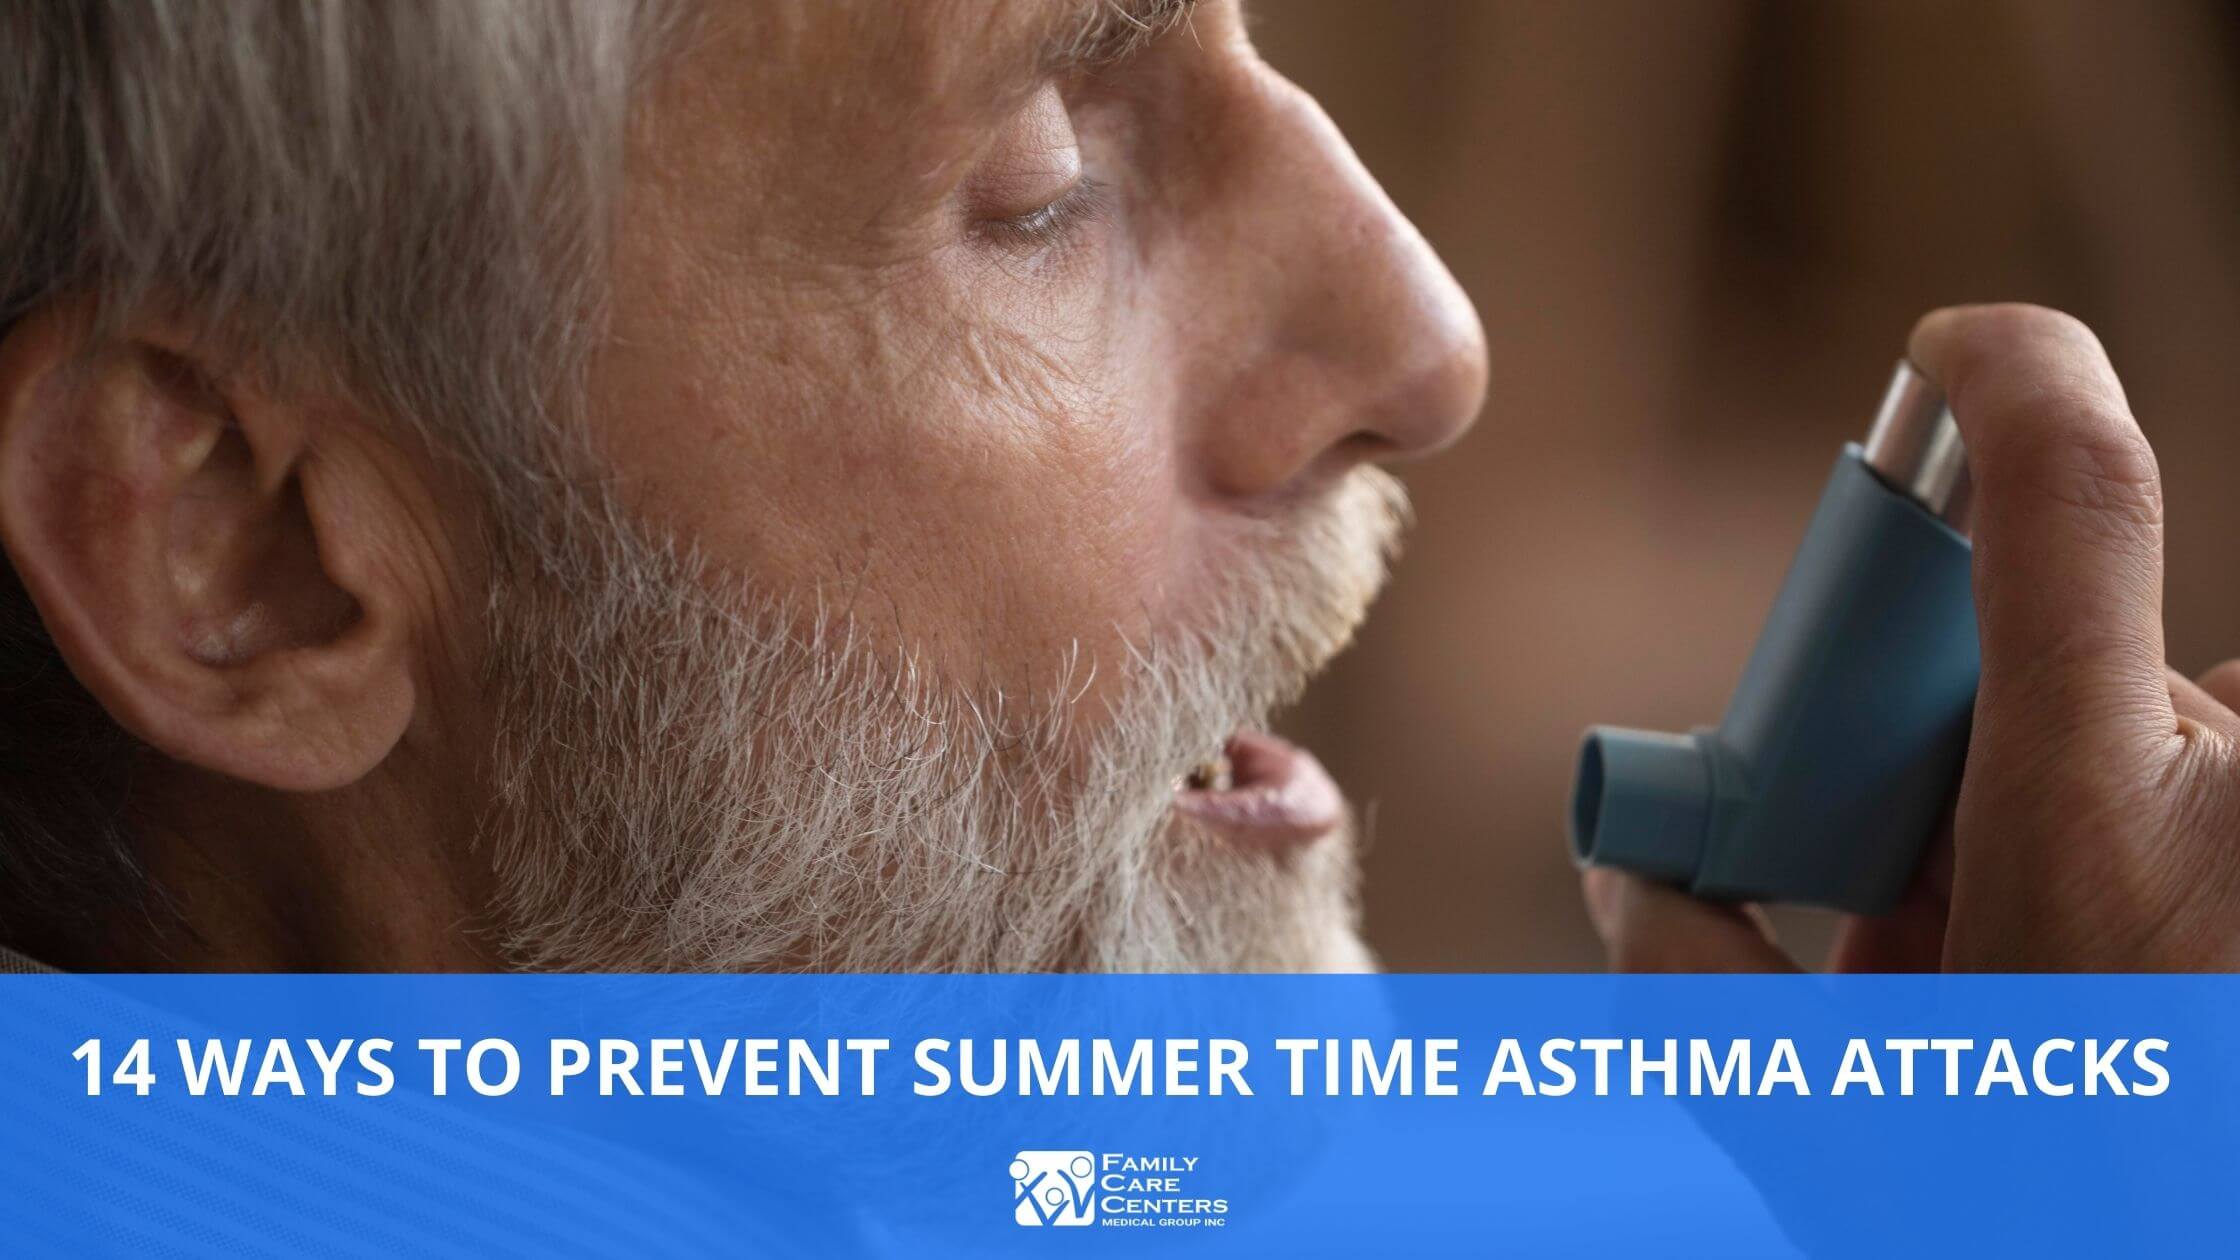 14 Ways to Prevent Summer Time Asthma Attacks